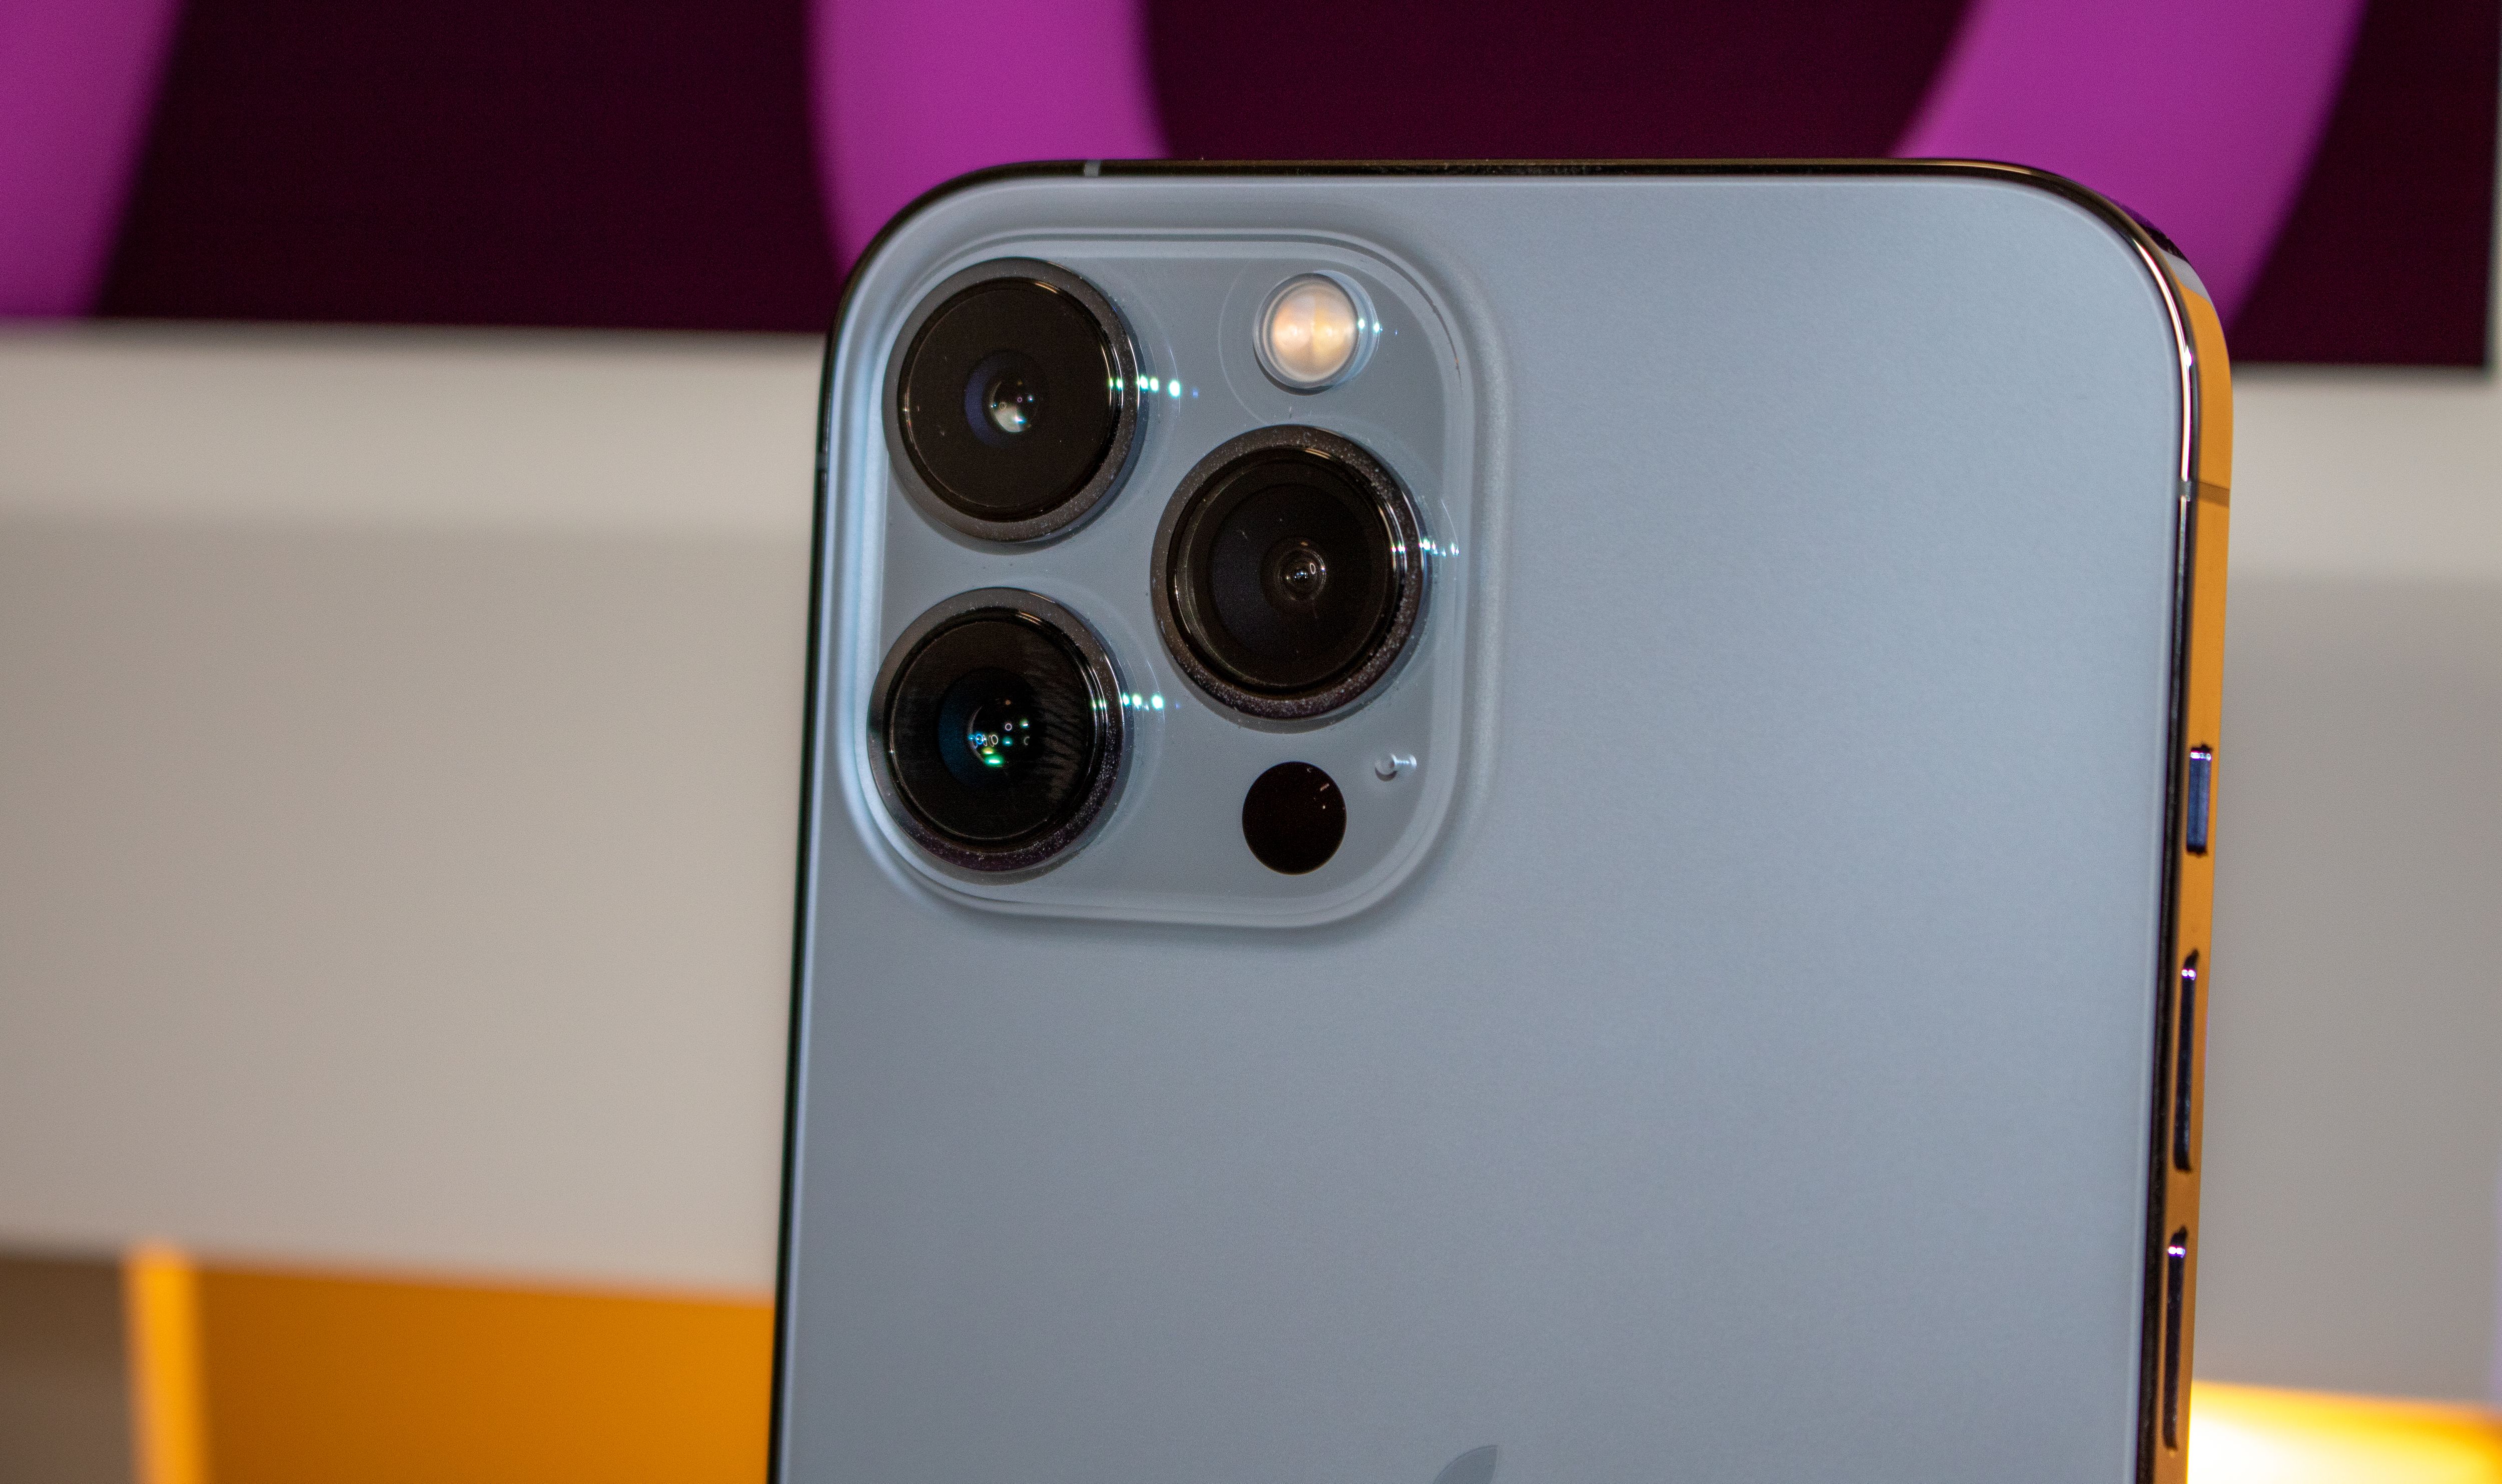 Apple iPhone 13 Pro review: Camera: Hardware, app, photo quality